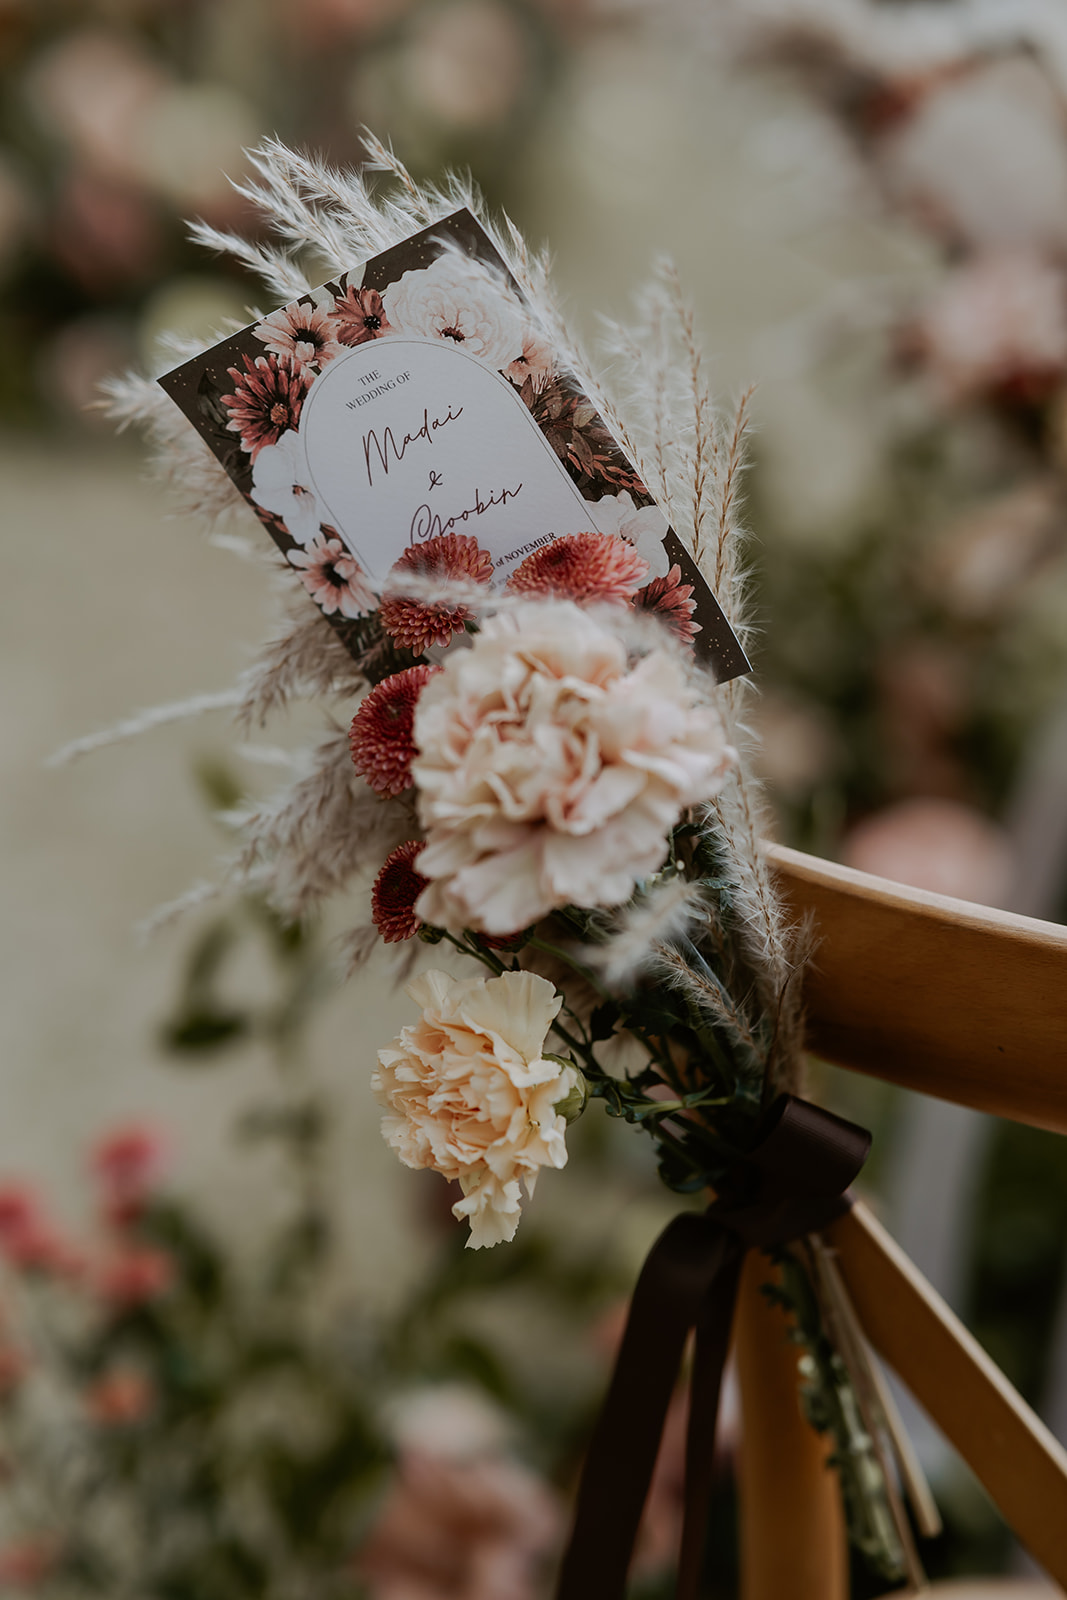 Decorated wooden chairs with floral arrangements and a name card for "mr. & mrs." at an outdoor wedding ceremony.